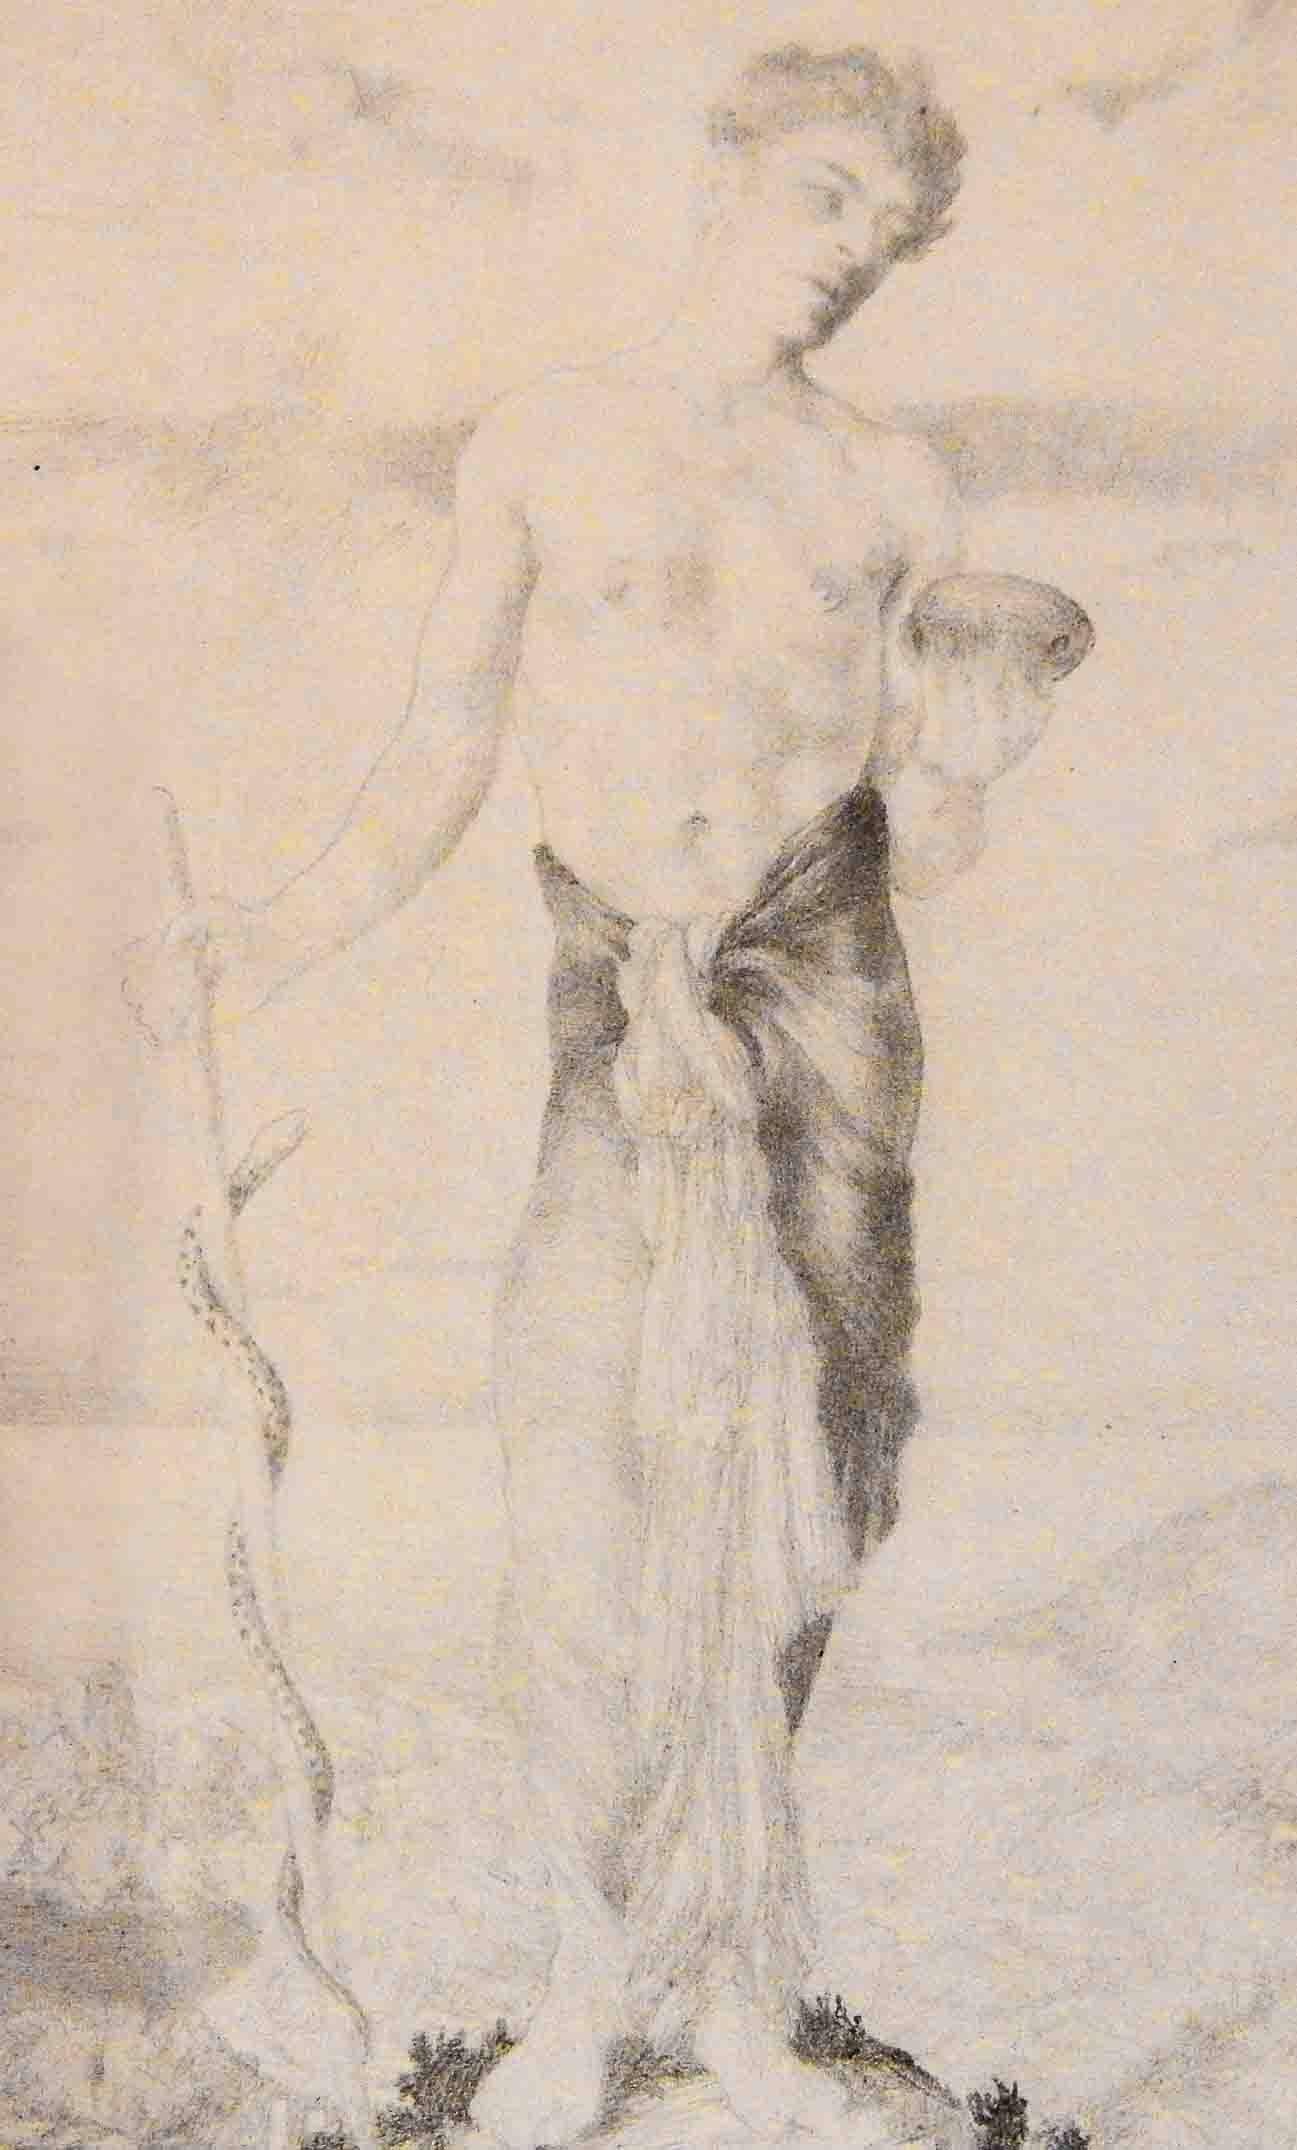 Mysterious and ethereal, this lovely drawing of a semi-nude male figure, carrying a caduceus and small jar, no doubt representing Mercury is clearly allegorical and suggestive of a personal story. Drawn by N. Cobb in 1928, it is dedicated to 